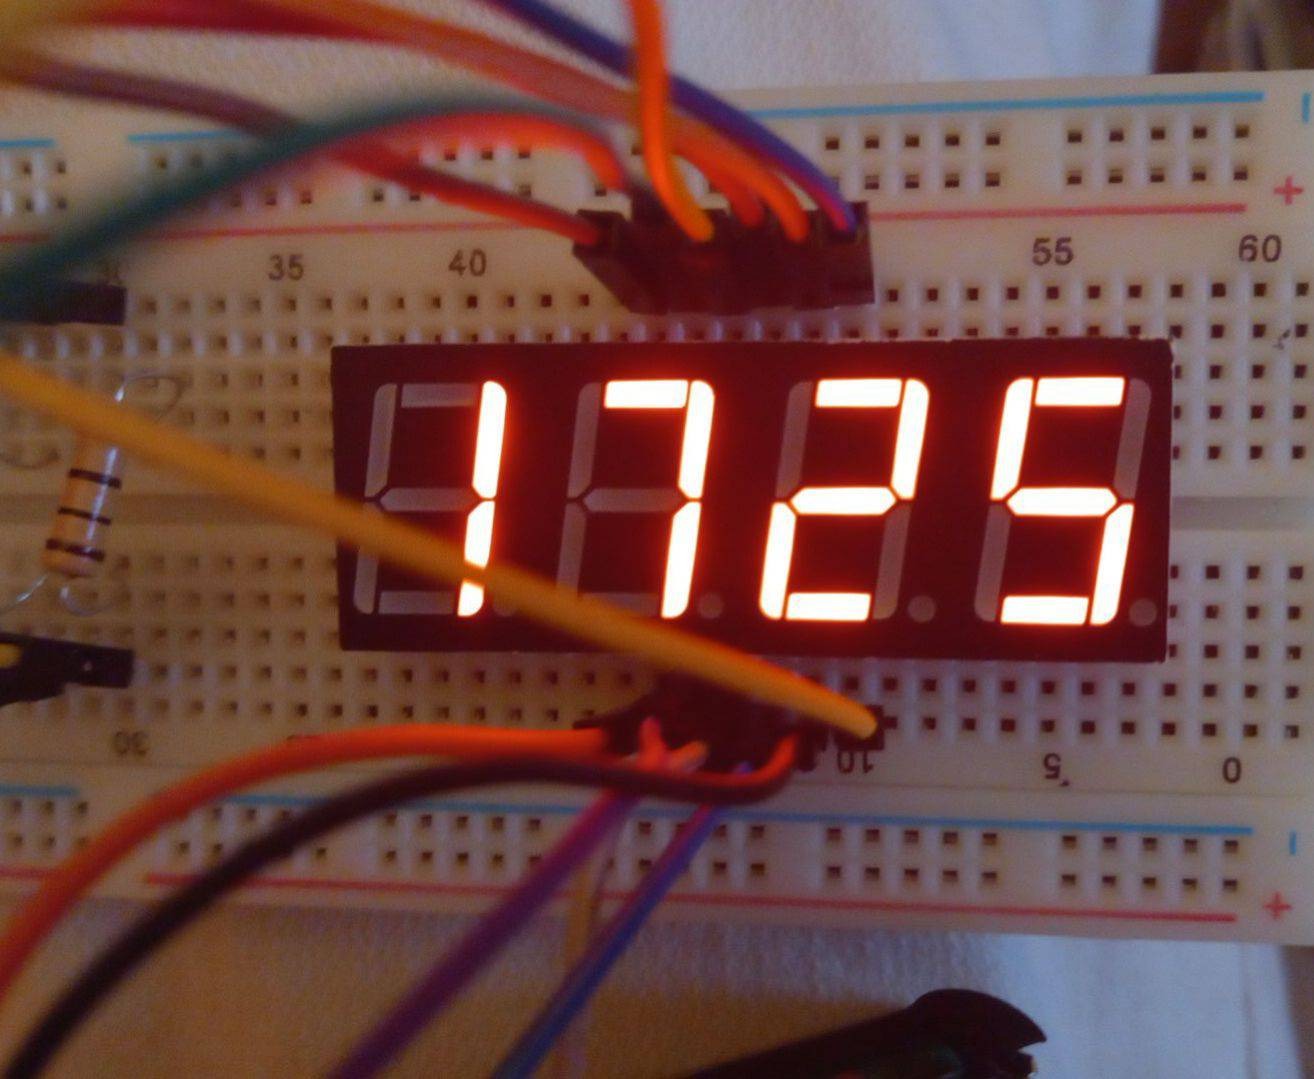 Output of final run, where the time is correct.